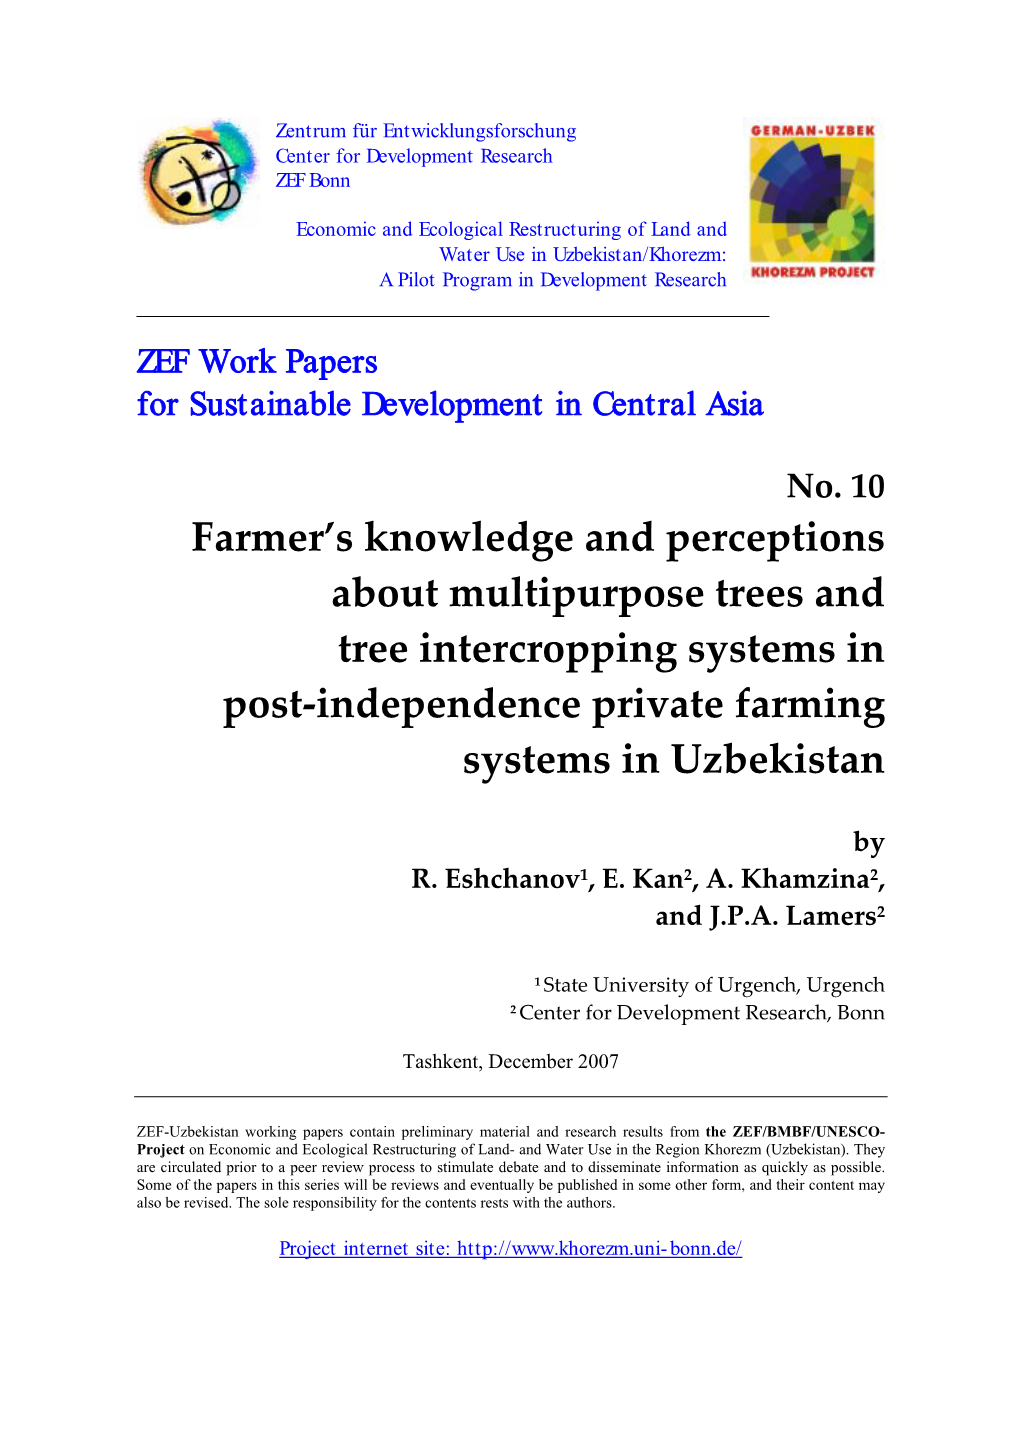 Farmer's Knowledge and Perceptions About Multipurpose Trees and Tree